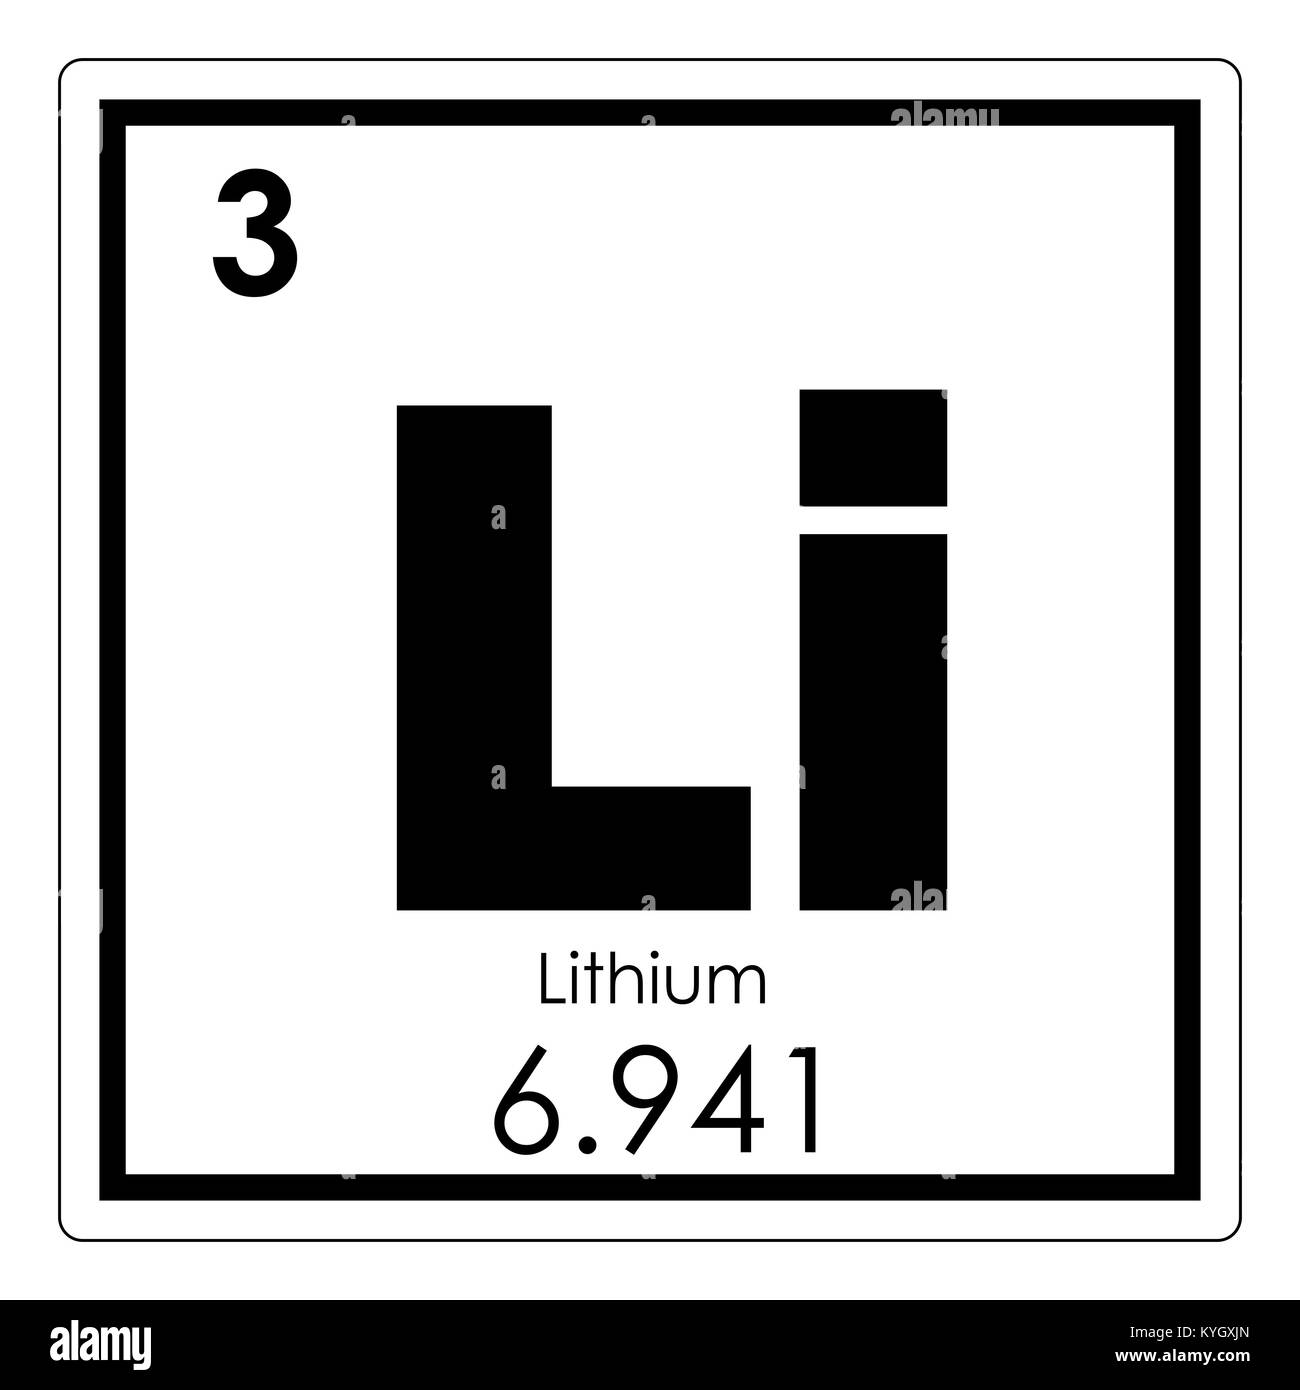 Lithium chemical element periodic table science symbol Stock Photo